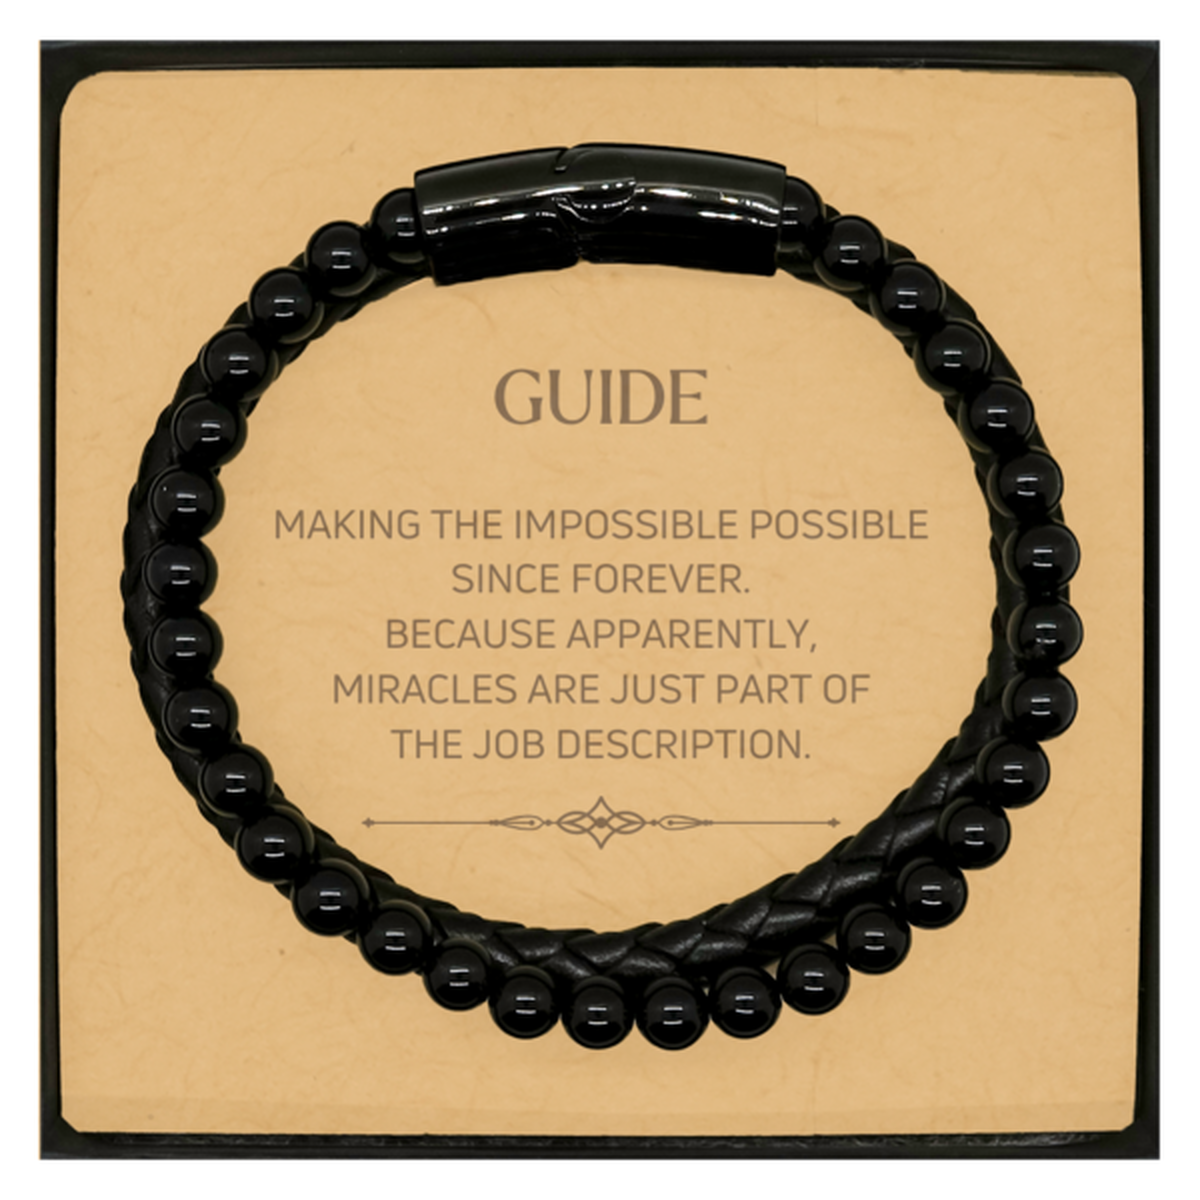 Funny Guide Gifts, Miracles are just part of the job description, Inspirational Birthday Christmas Stone Leather Bracelets For Guide, Men, Women, Coworkers, Friends, Boss